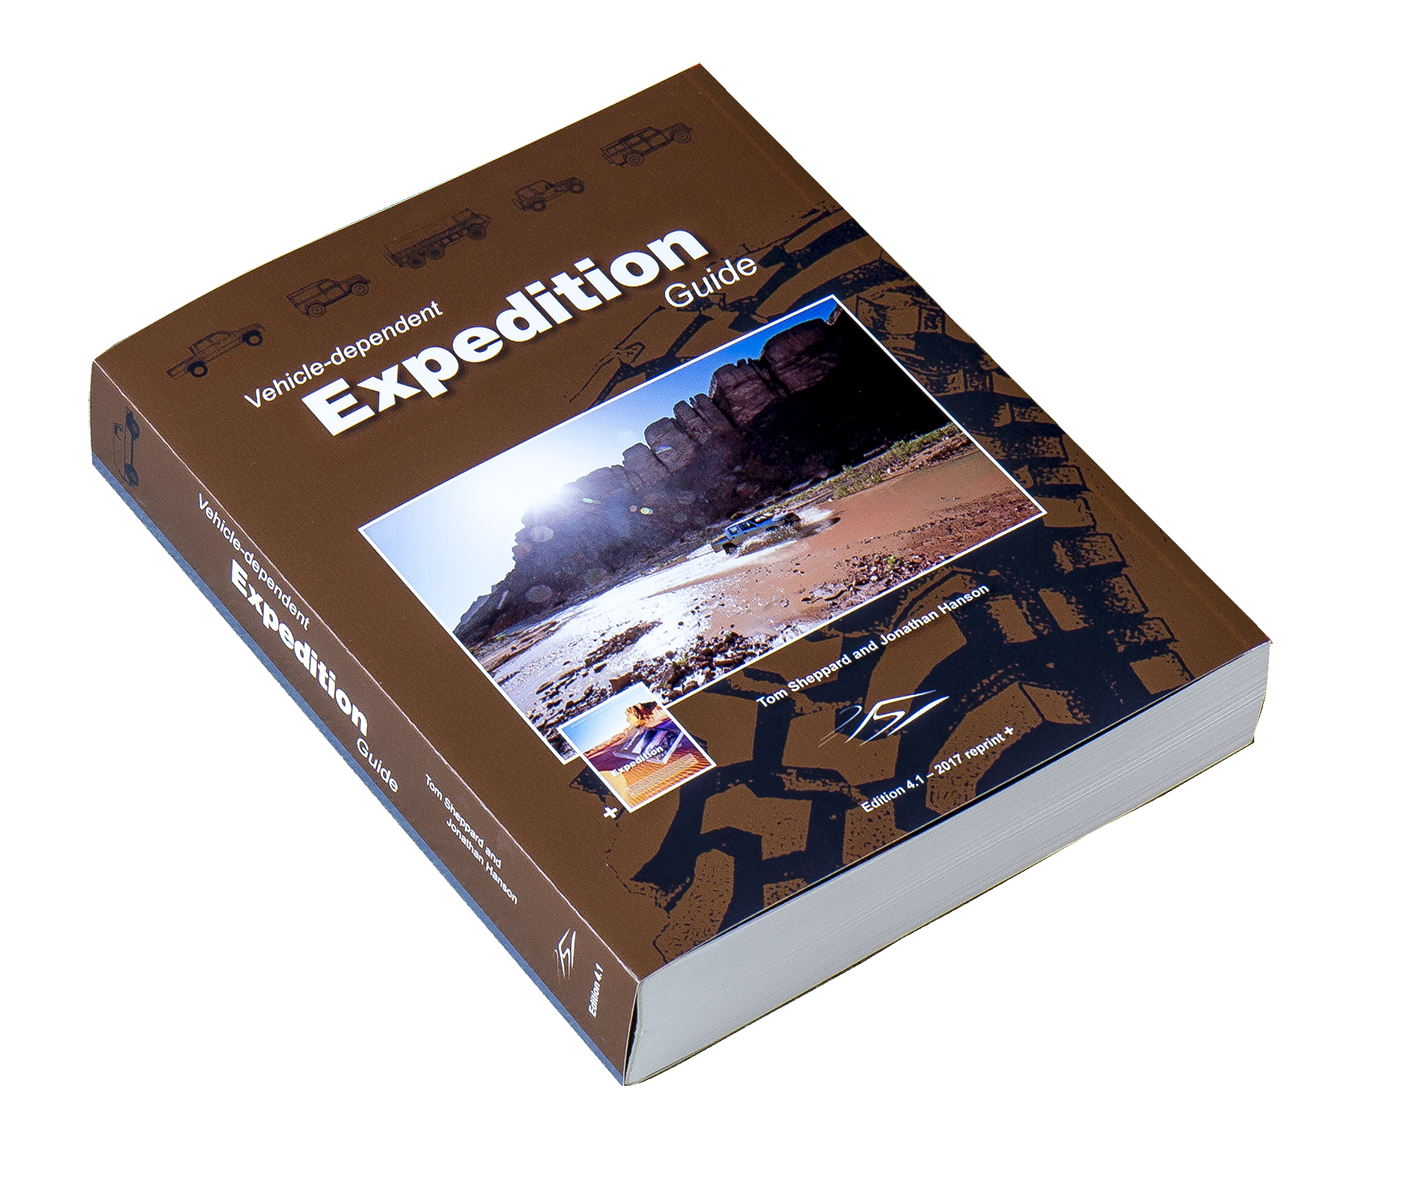 Vehicle-dependent Expedition Guide 4.1 Autor: Tom Sheppard